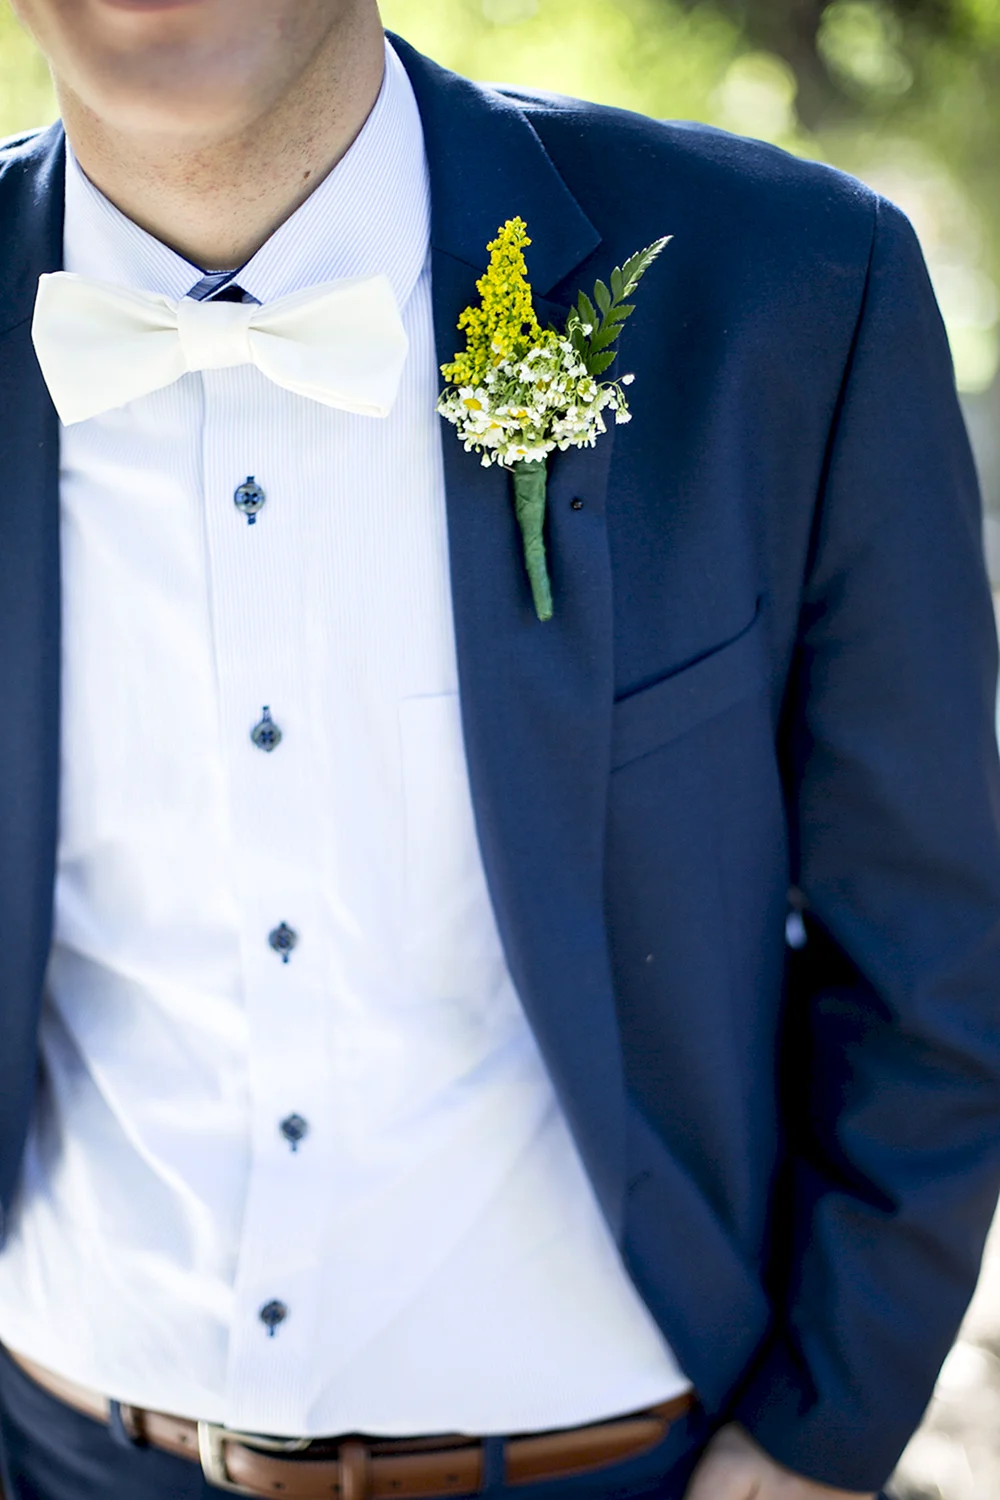 Boutonniere in White Suit